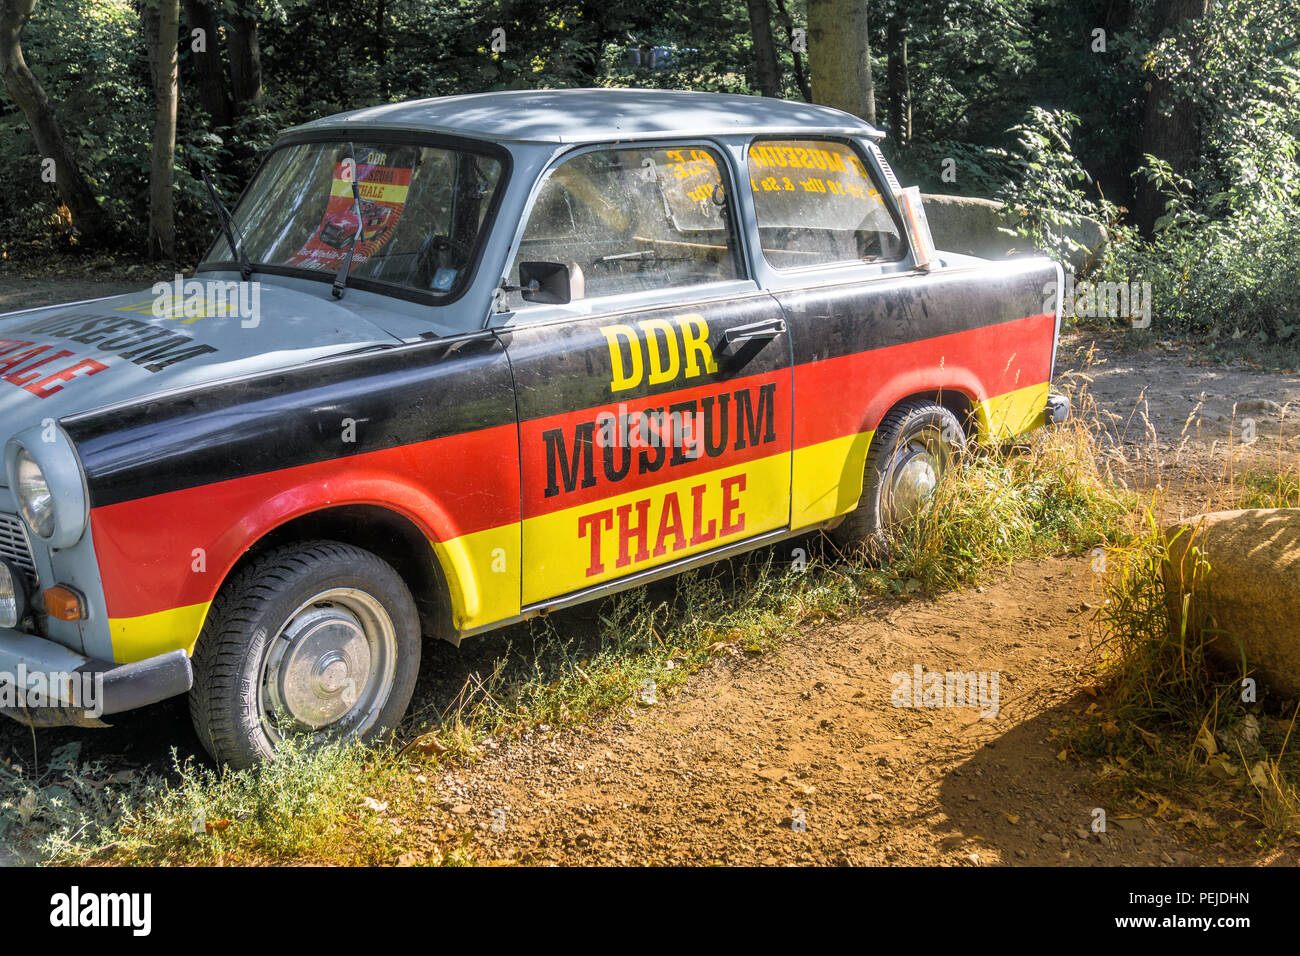 Ddr Museum Thale High Resolution Stock Photography And Images Alamy